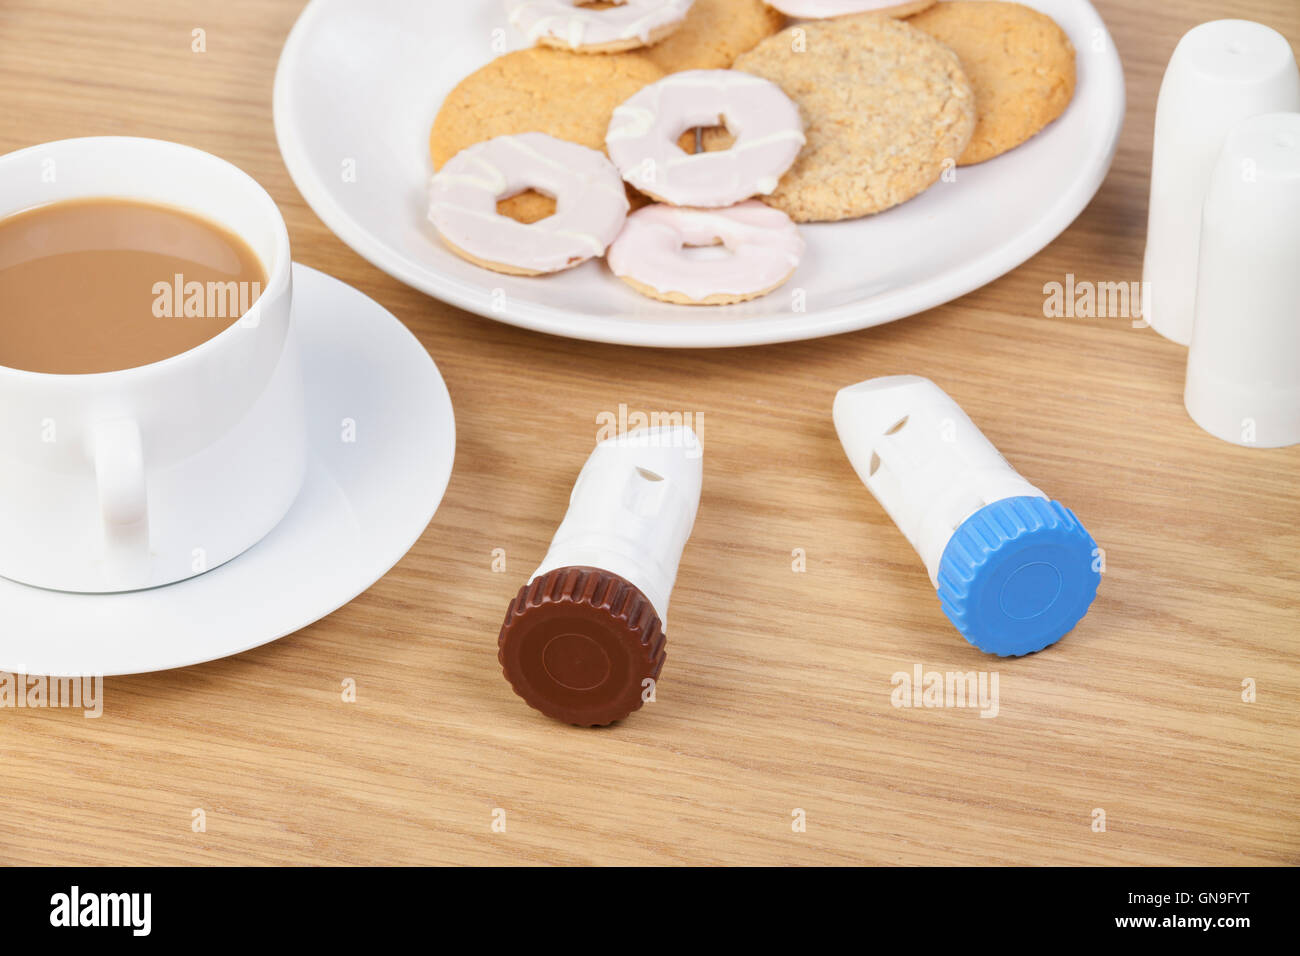 Brown and blue asthma powder inhalers laying on the breakfast table next to a cup of coffee and a plate of biscuits Stock Photo